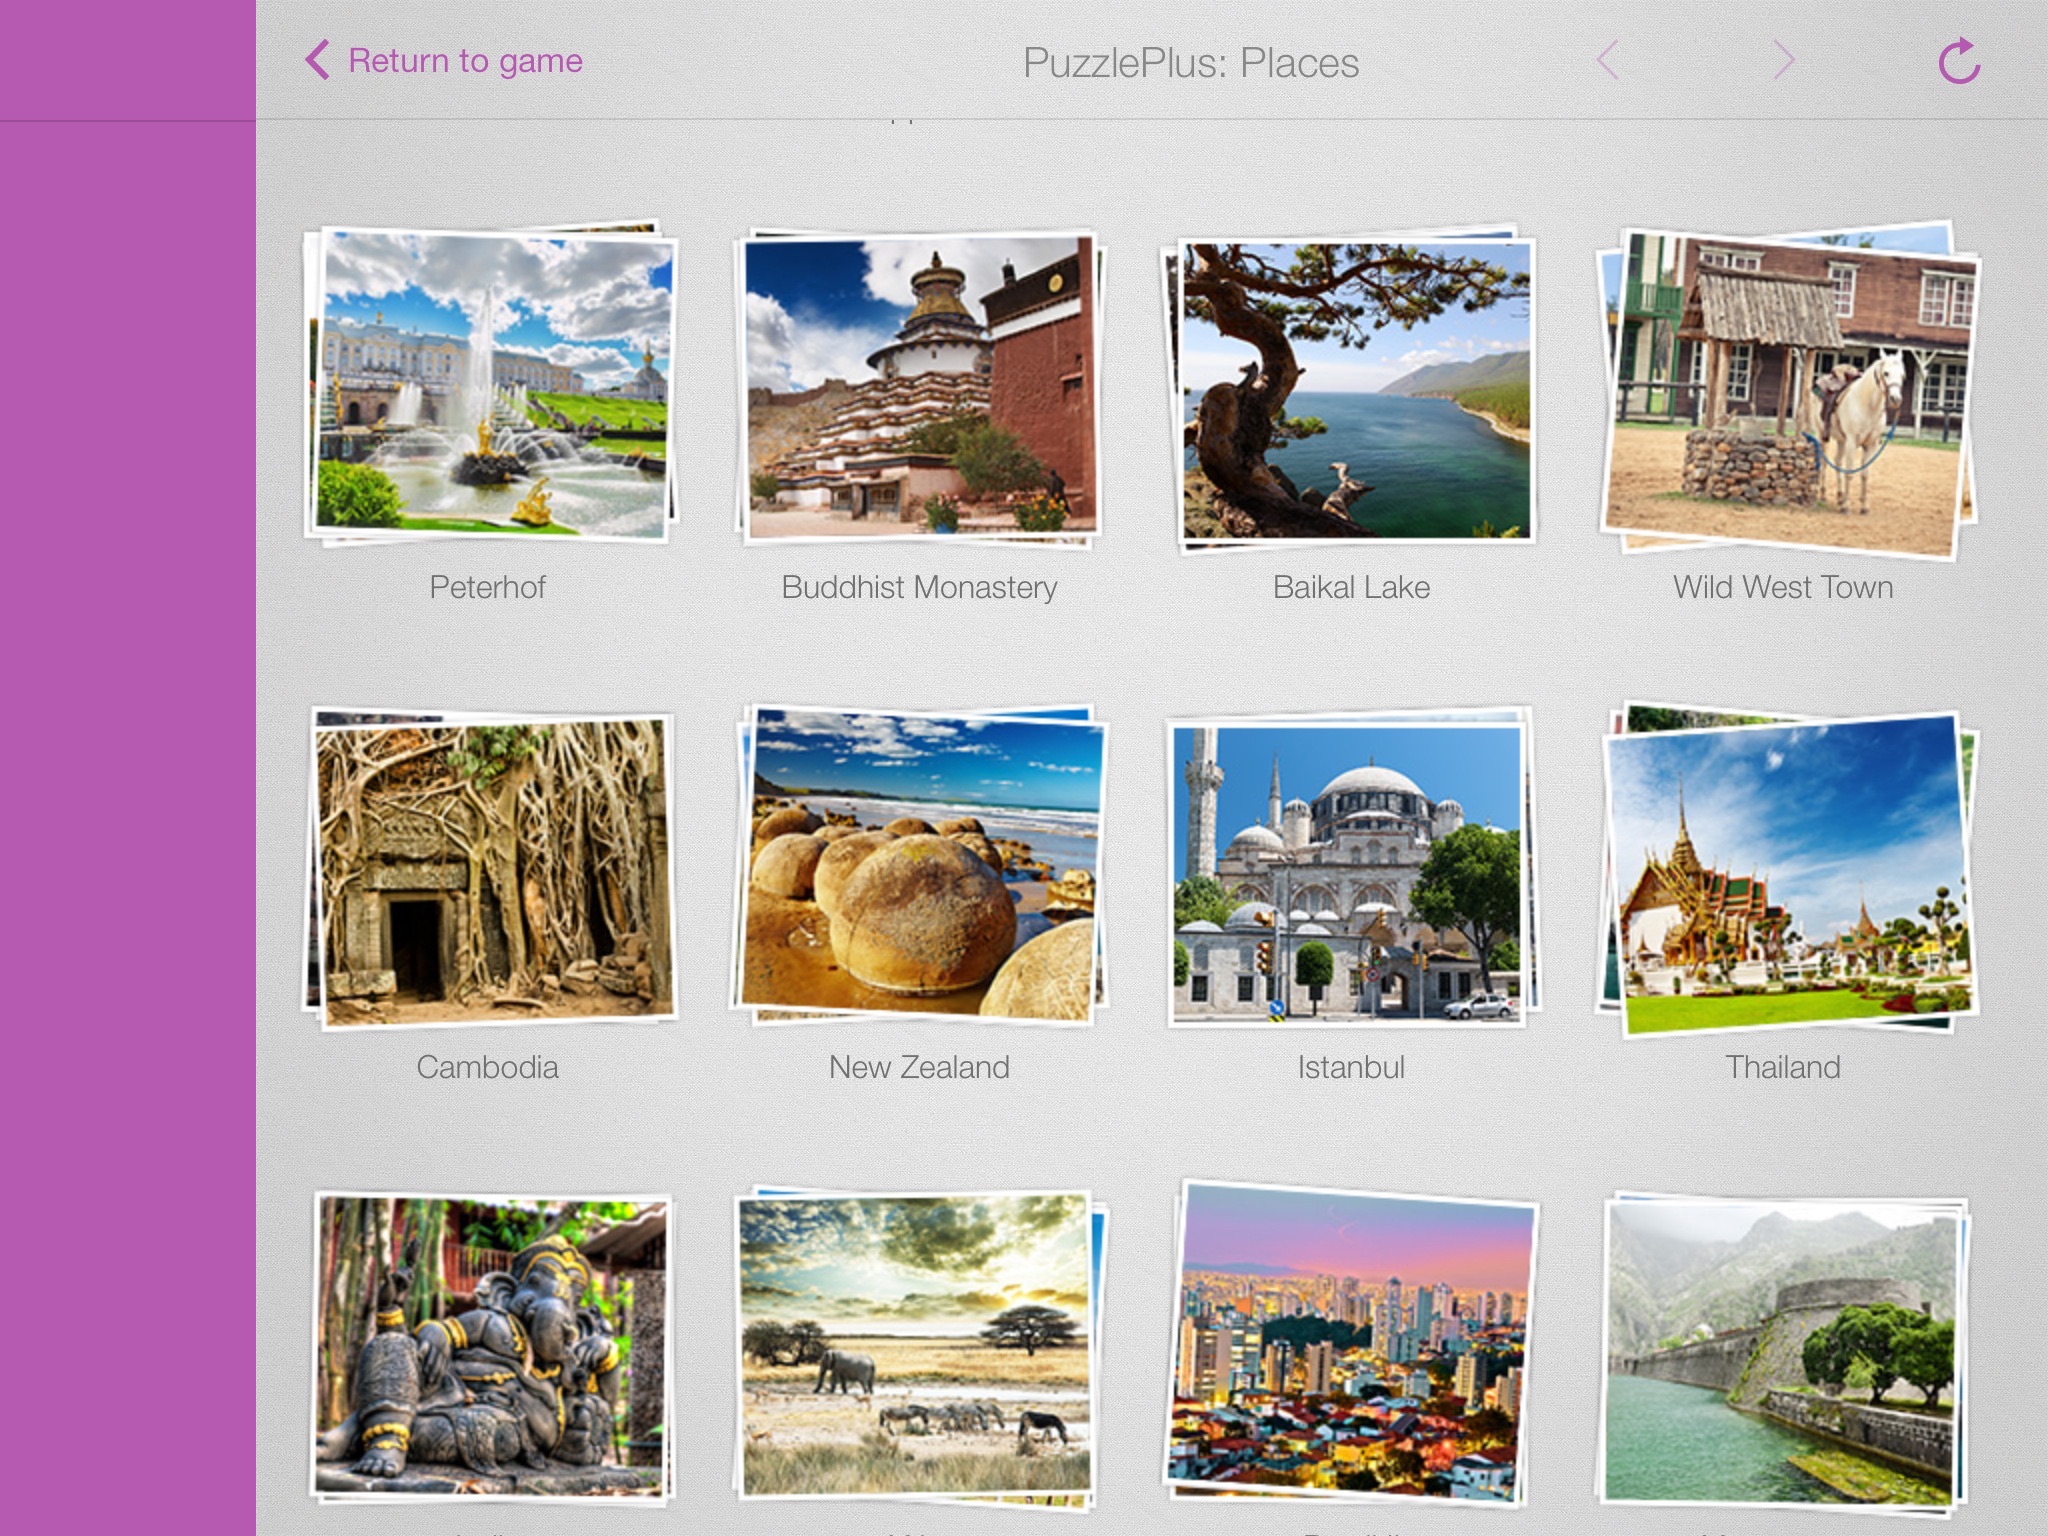 1000 Jigsaw Puzzles Places screenshot 2